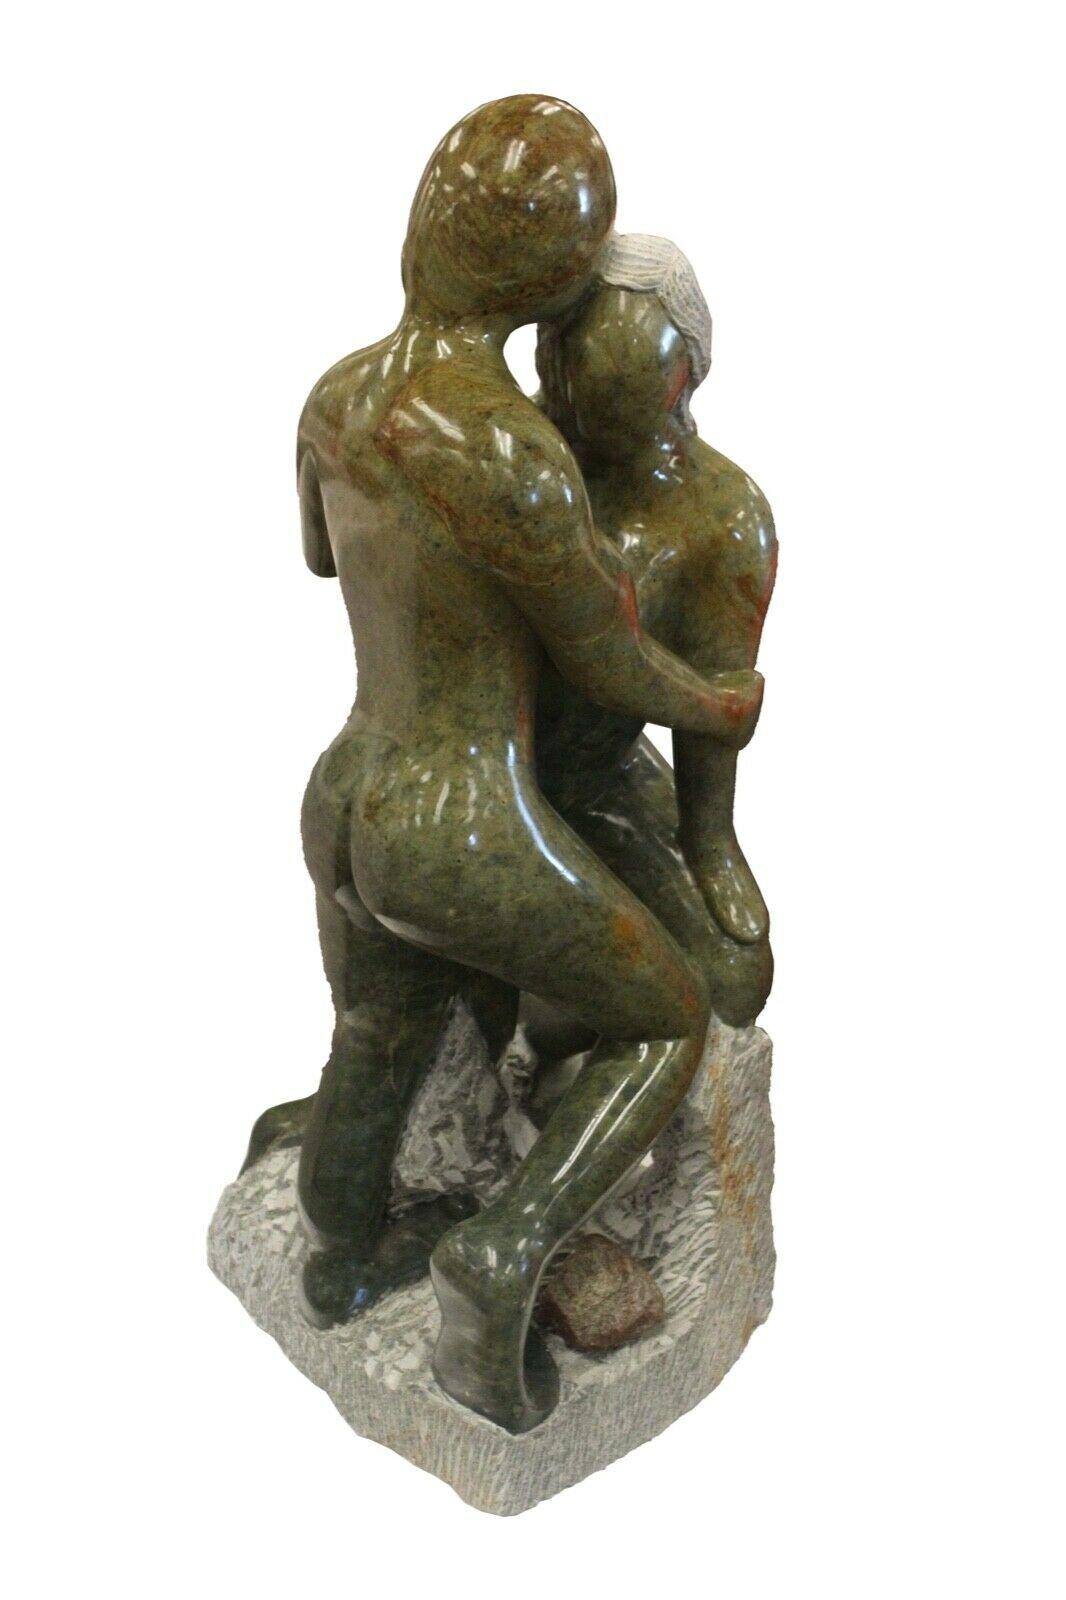 Incredibly large Soap Stone carving of two people hugging. Anatomically skilled artesian. Great use of stones
 natural coloration lending to the overall esthetics. Great use of both highly polished and texturized surfaces.
Sculptor created this